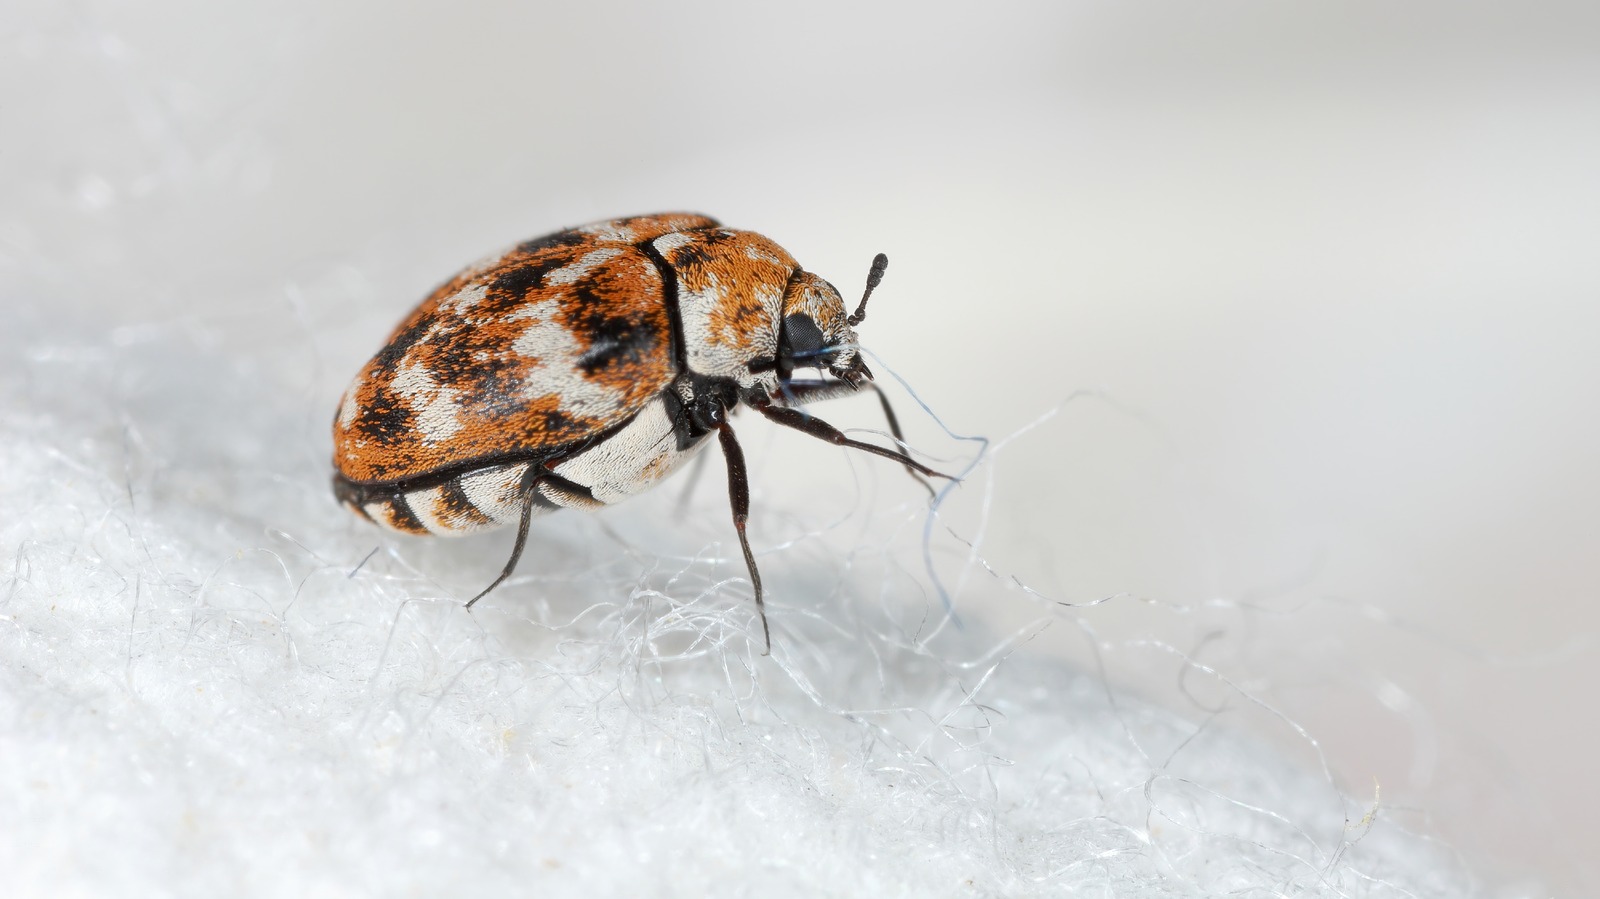 https://www.housedigest.com/img/gallery/these-popular-scents-will-keep-carpet-beetles-out-of-the-house/l-intro-1696953466.jpg